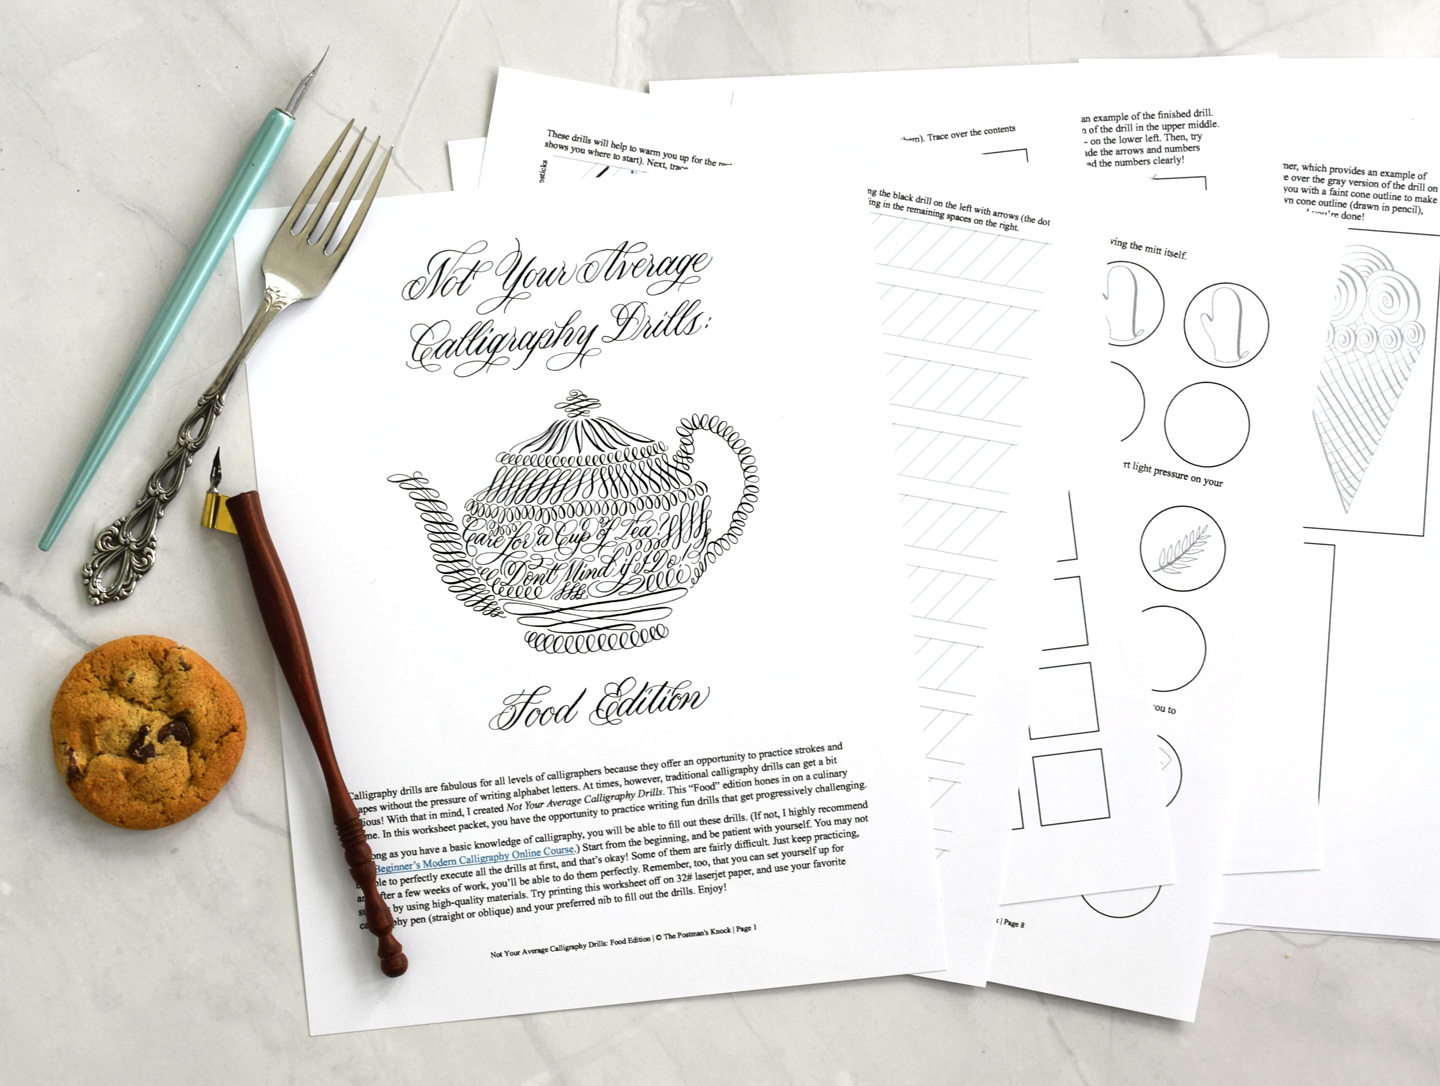 Introducing TPK’s “Food Edition” Calligraphy Drills